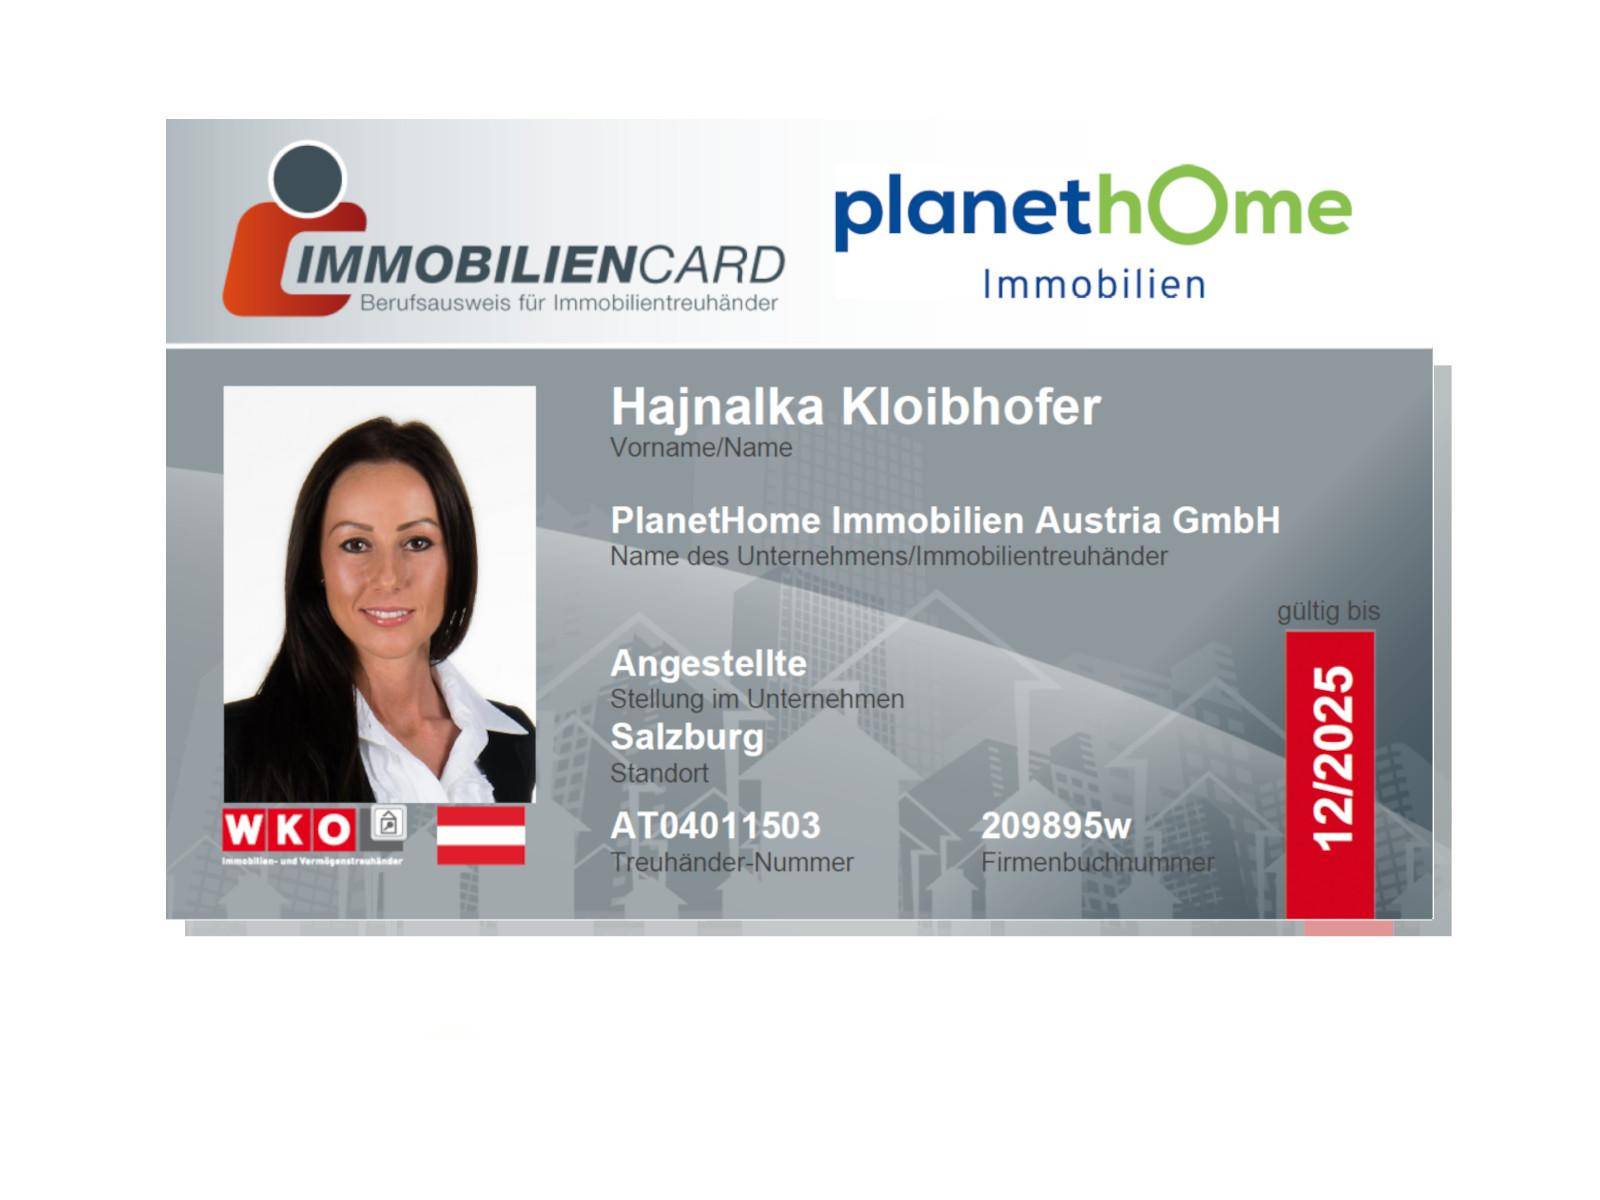 Immobiliencard.